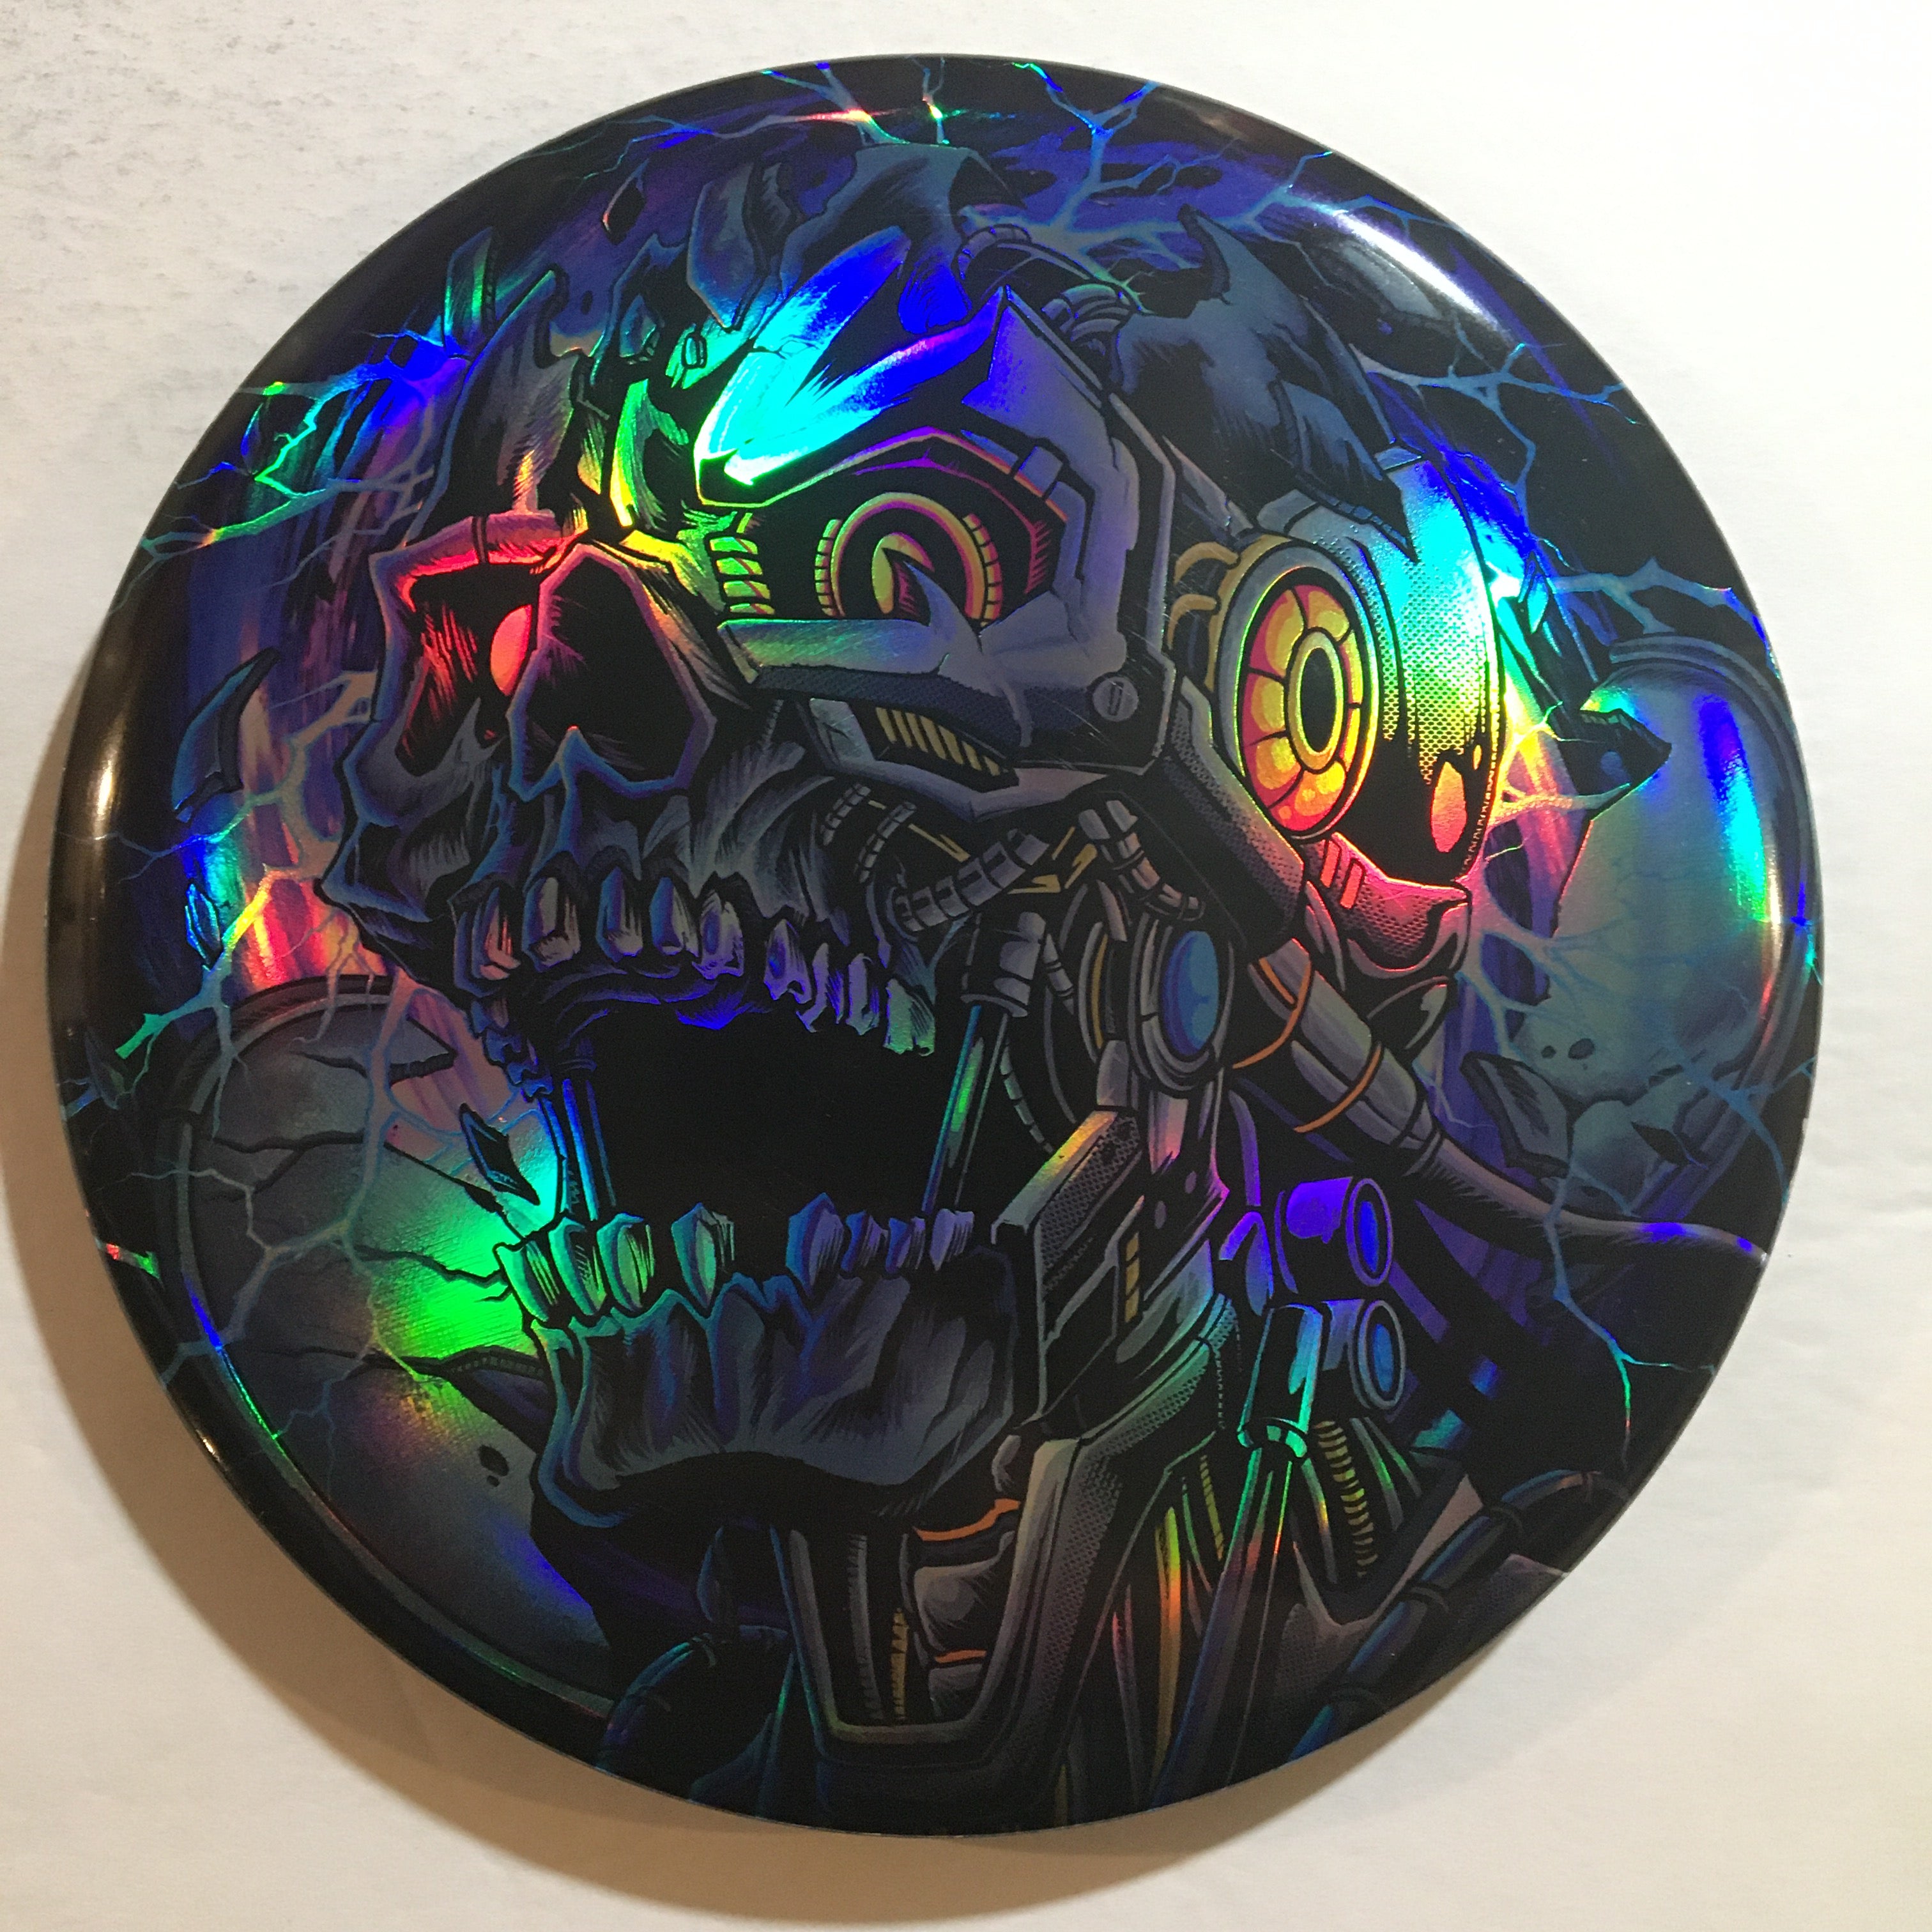 Buzzz Full Foil (Cyber Skull) LIMITED EDITION